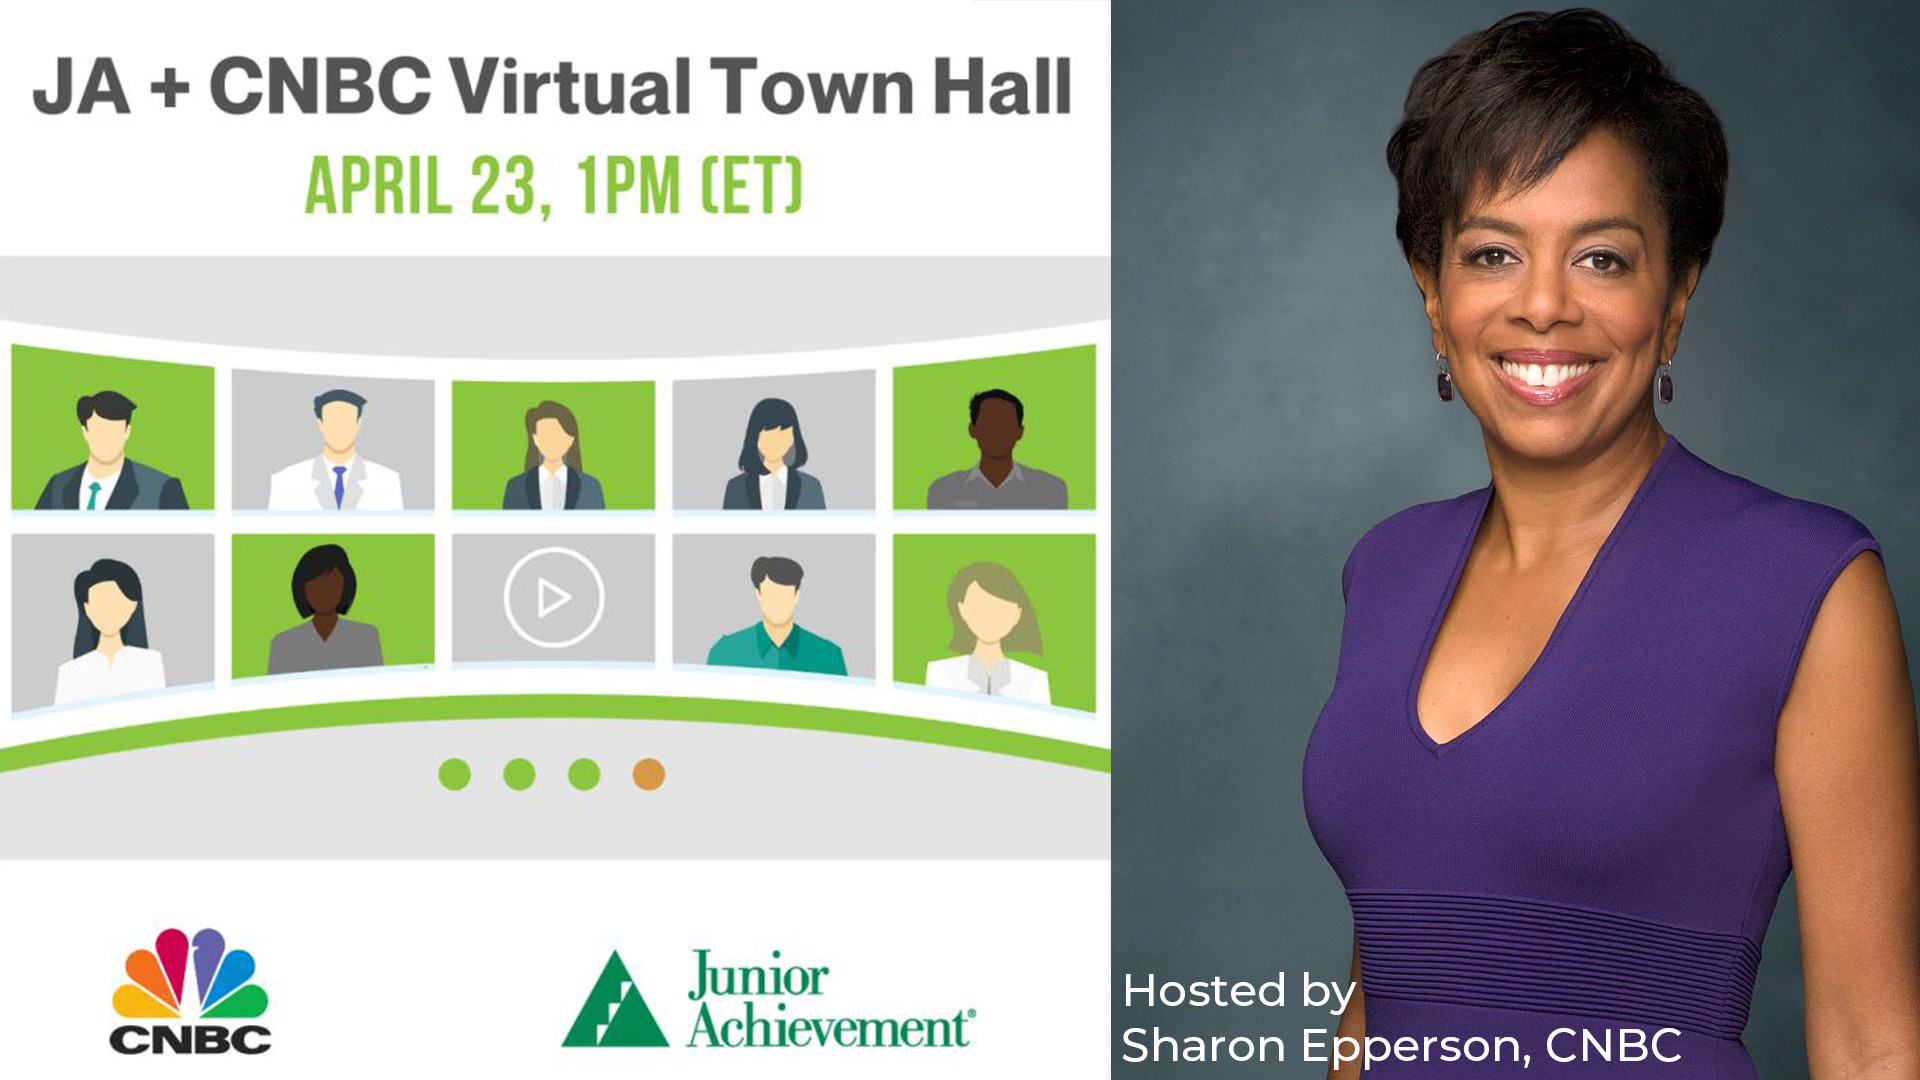 JA + CNBC Virtual Town Hall Recording Available